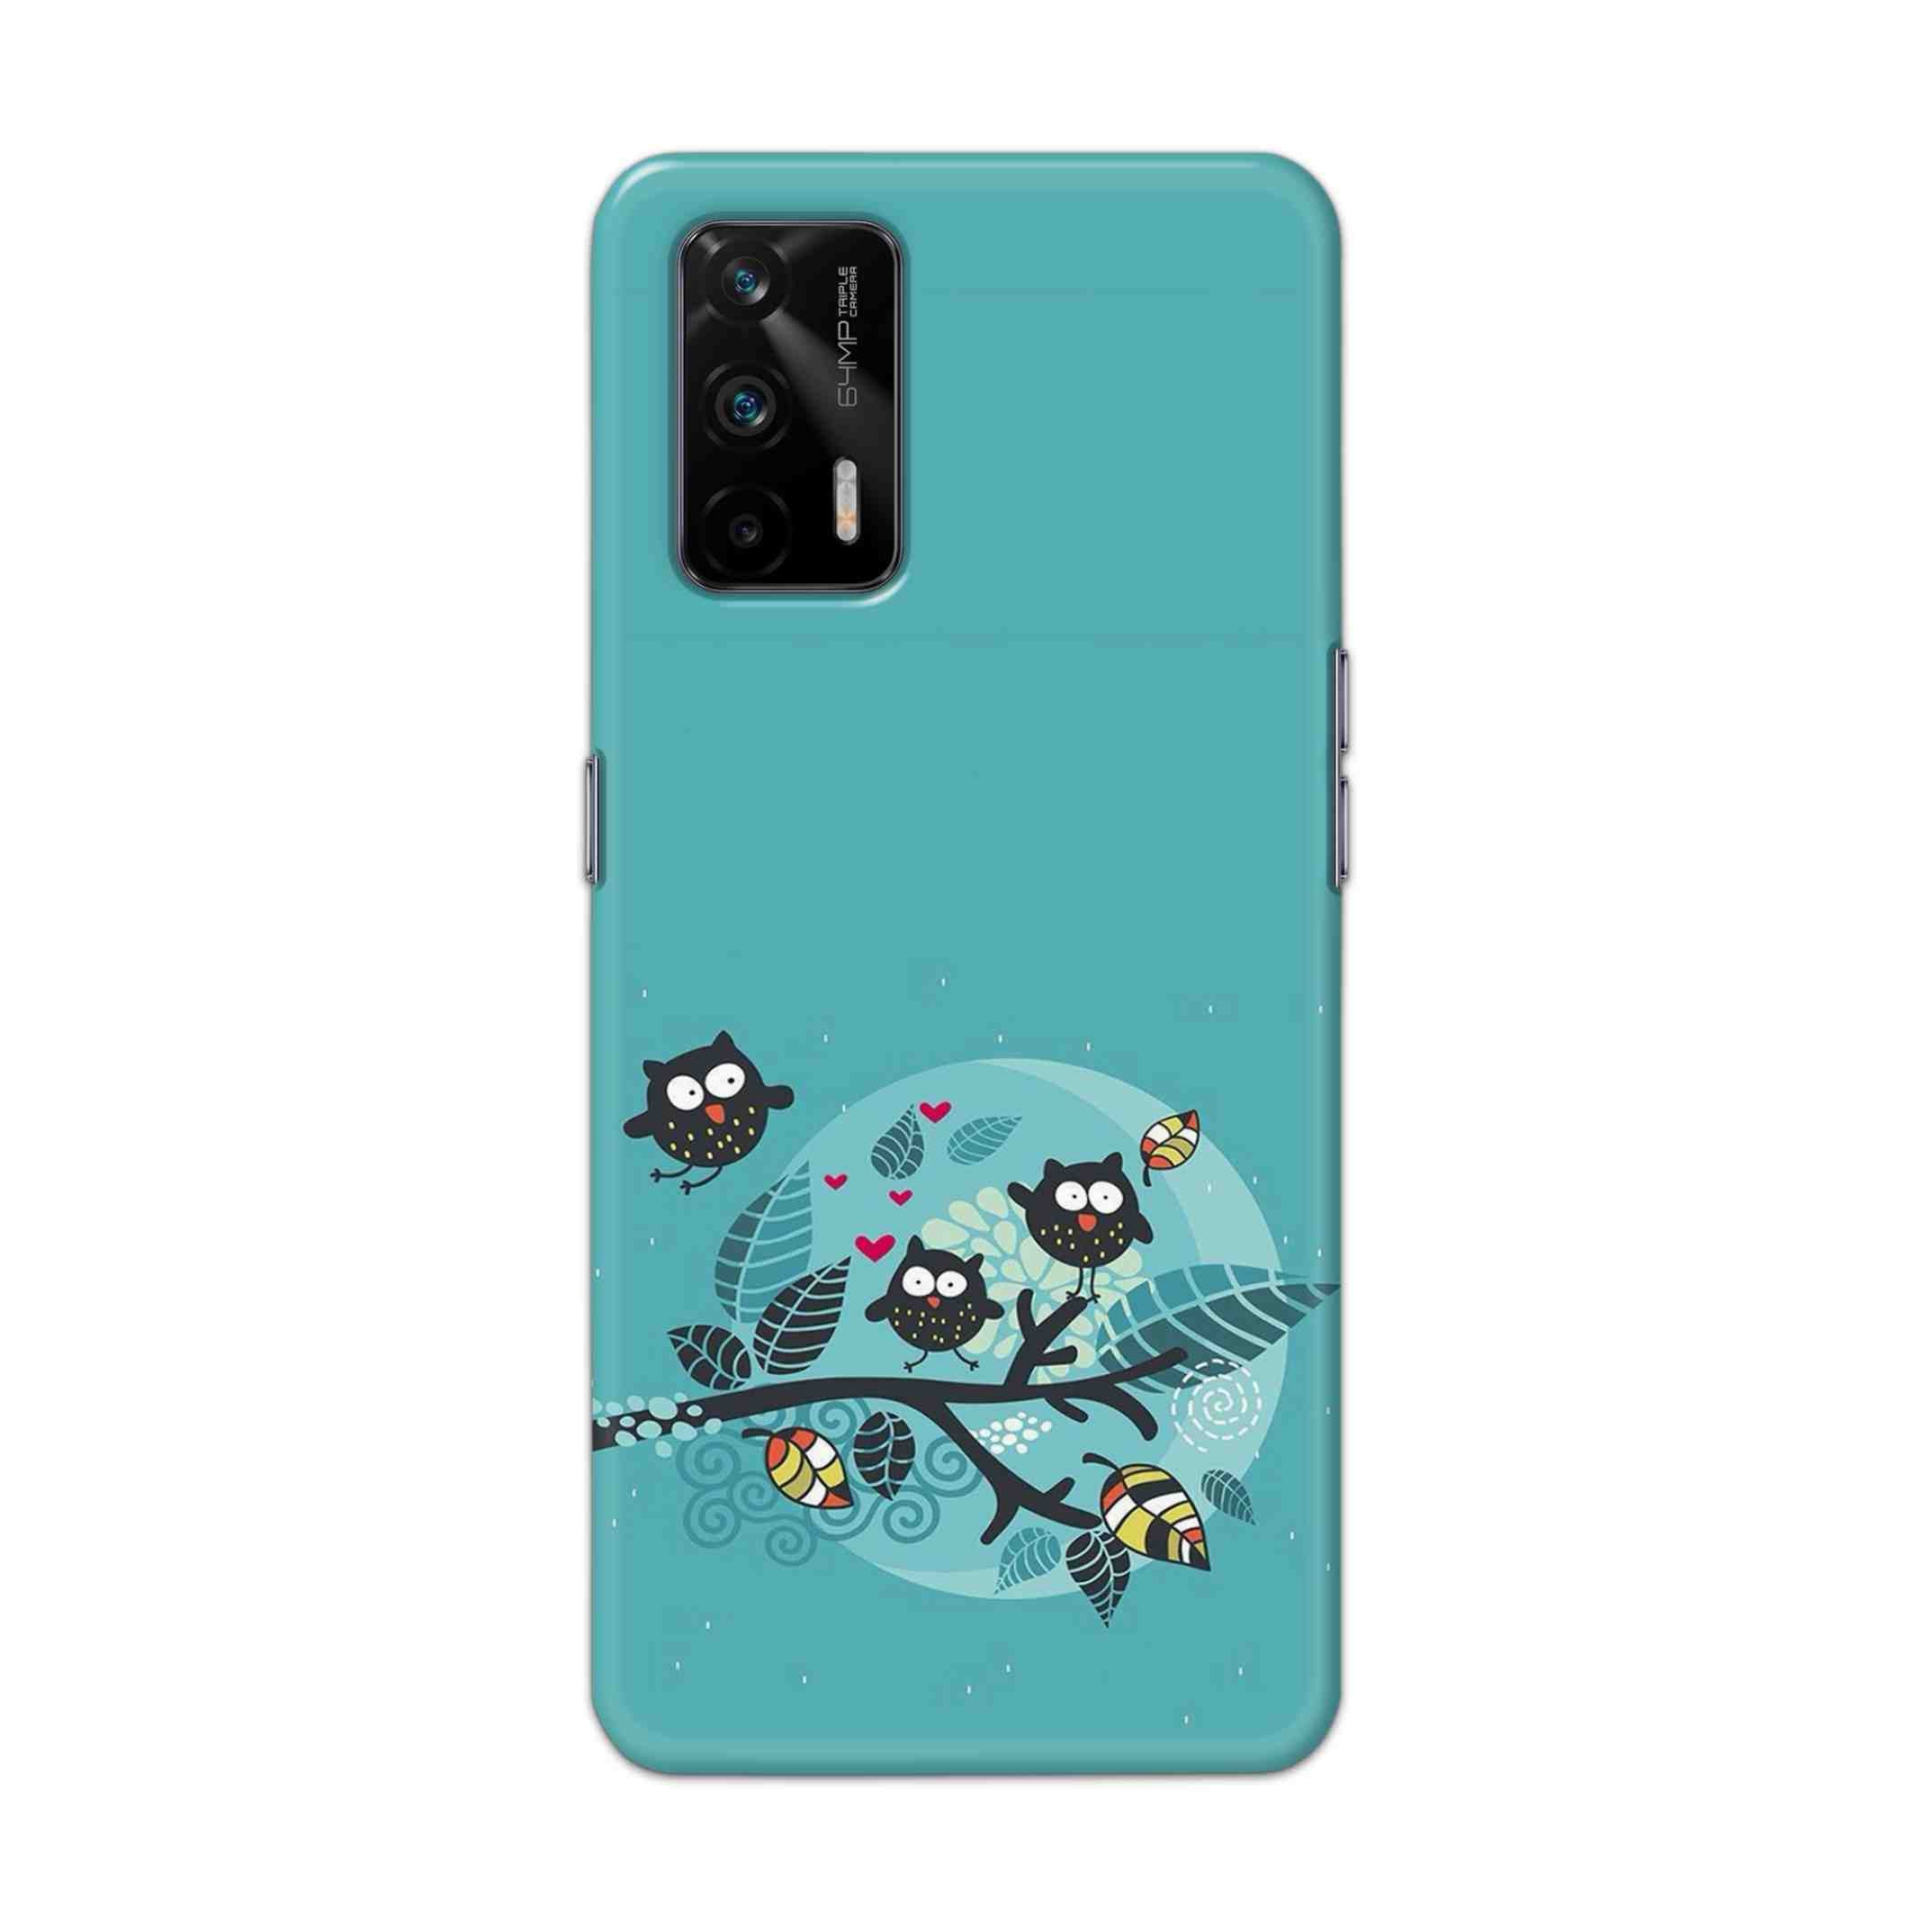 Buy Owl Hard Back Mobile Phone Case Cover For Realme X7 Max Online